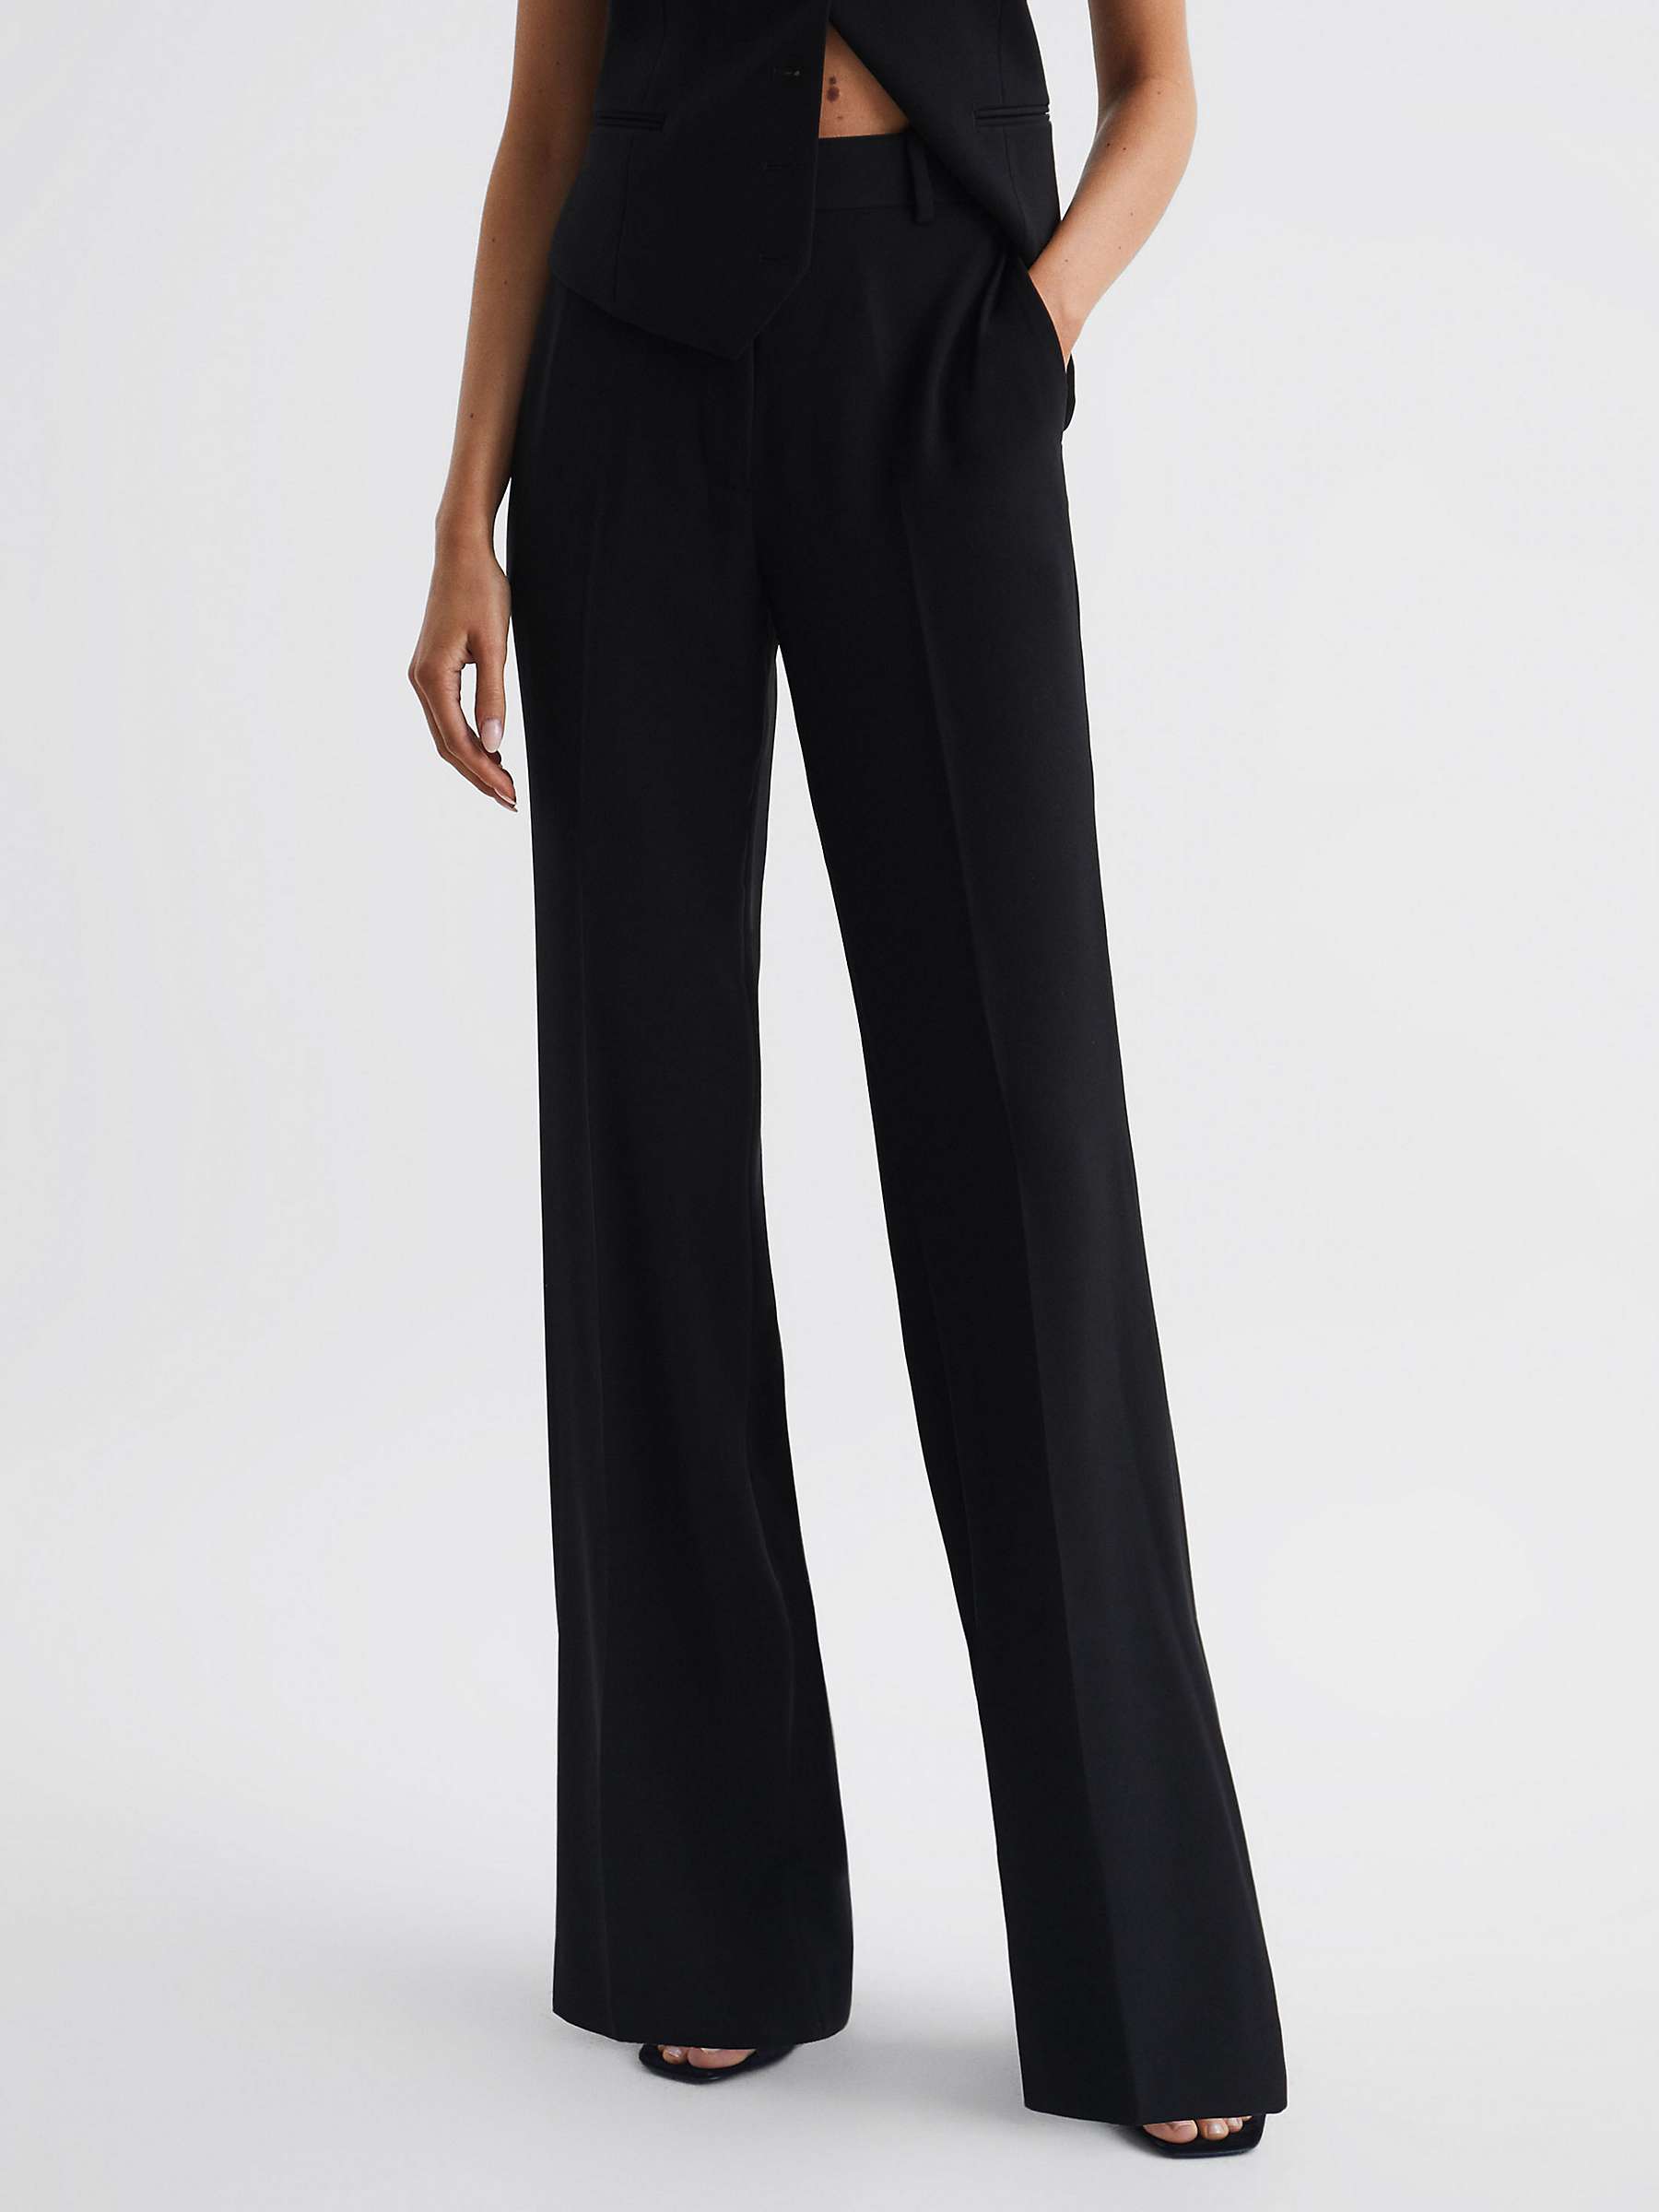 Buy Reiss Margeaux Tailored Trousers Online at johnlewis.com